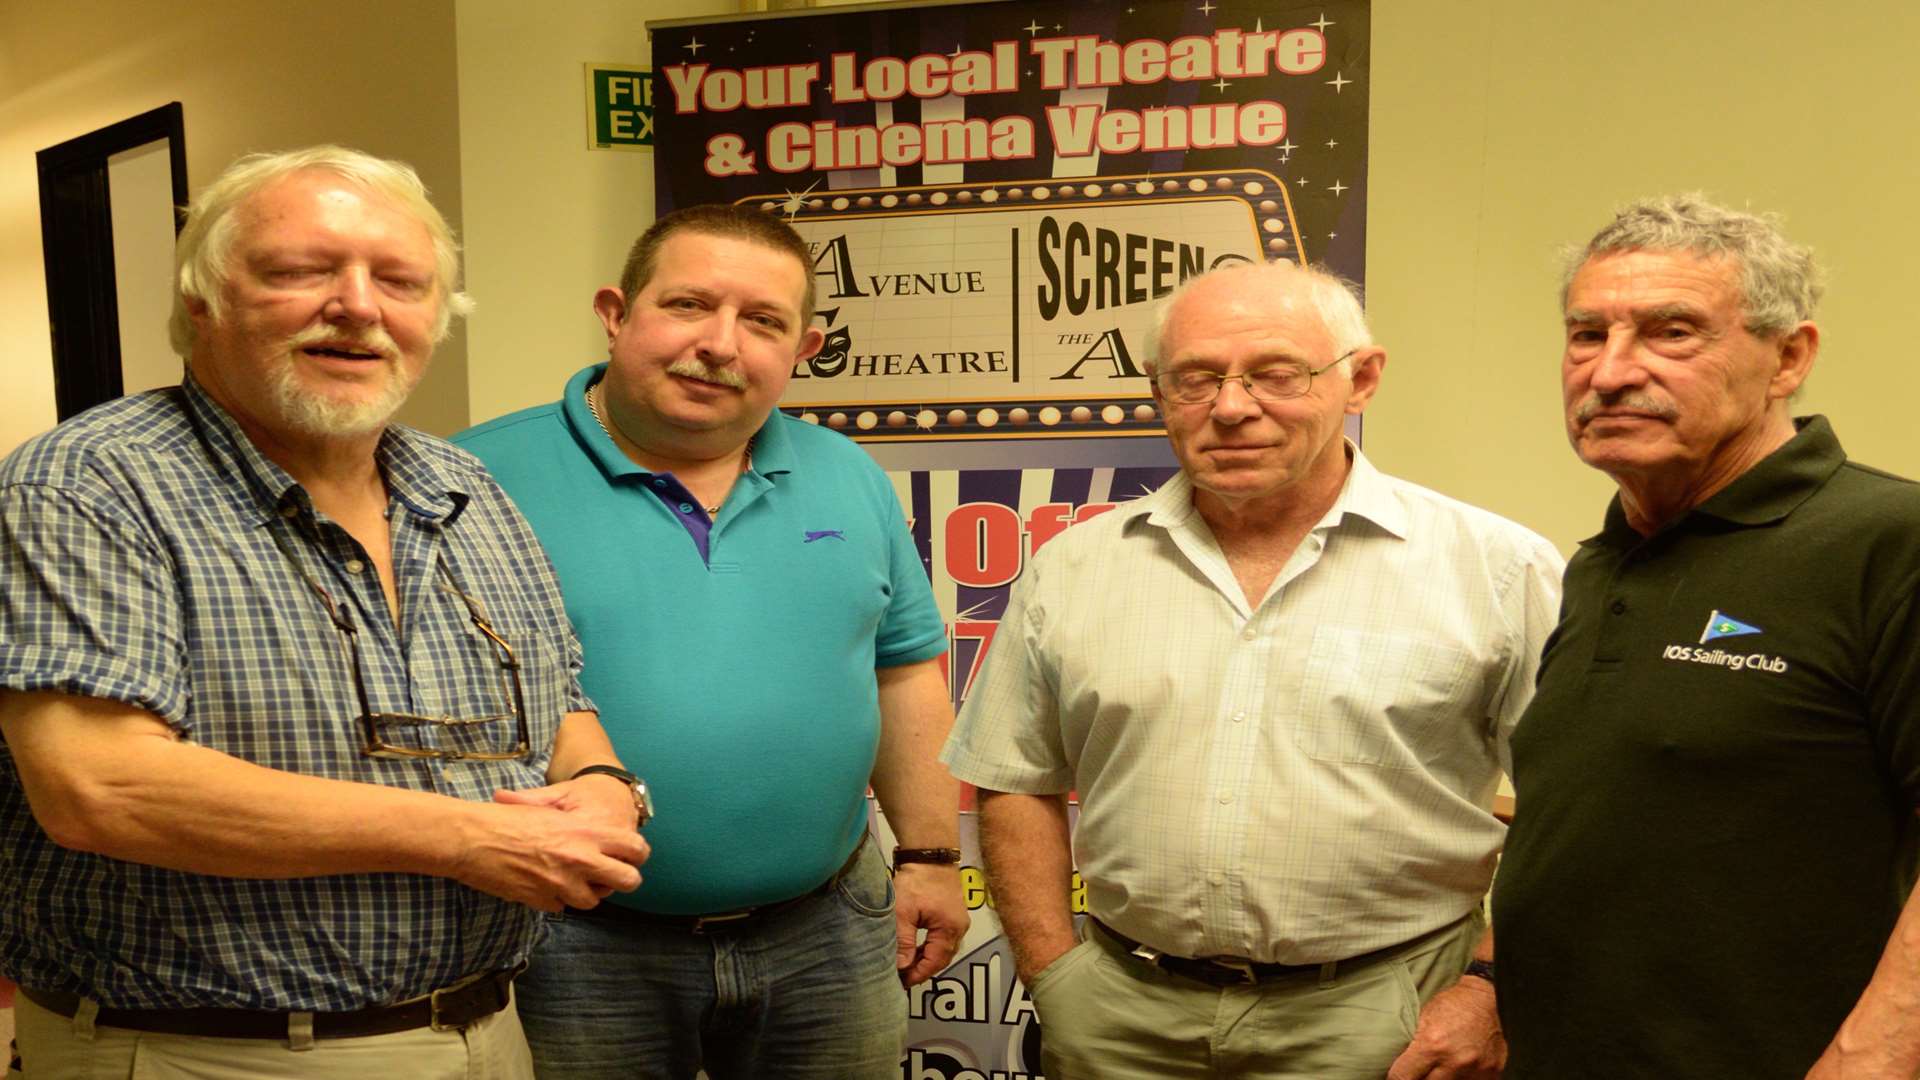 Sittingbourne Director Ken Rowles chats with Simon Clark, Stan Hampshire and Tim Bell at the screening of the film